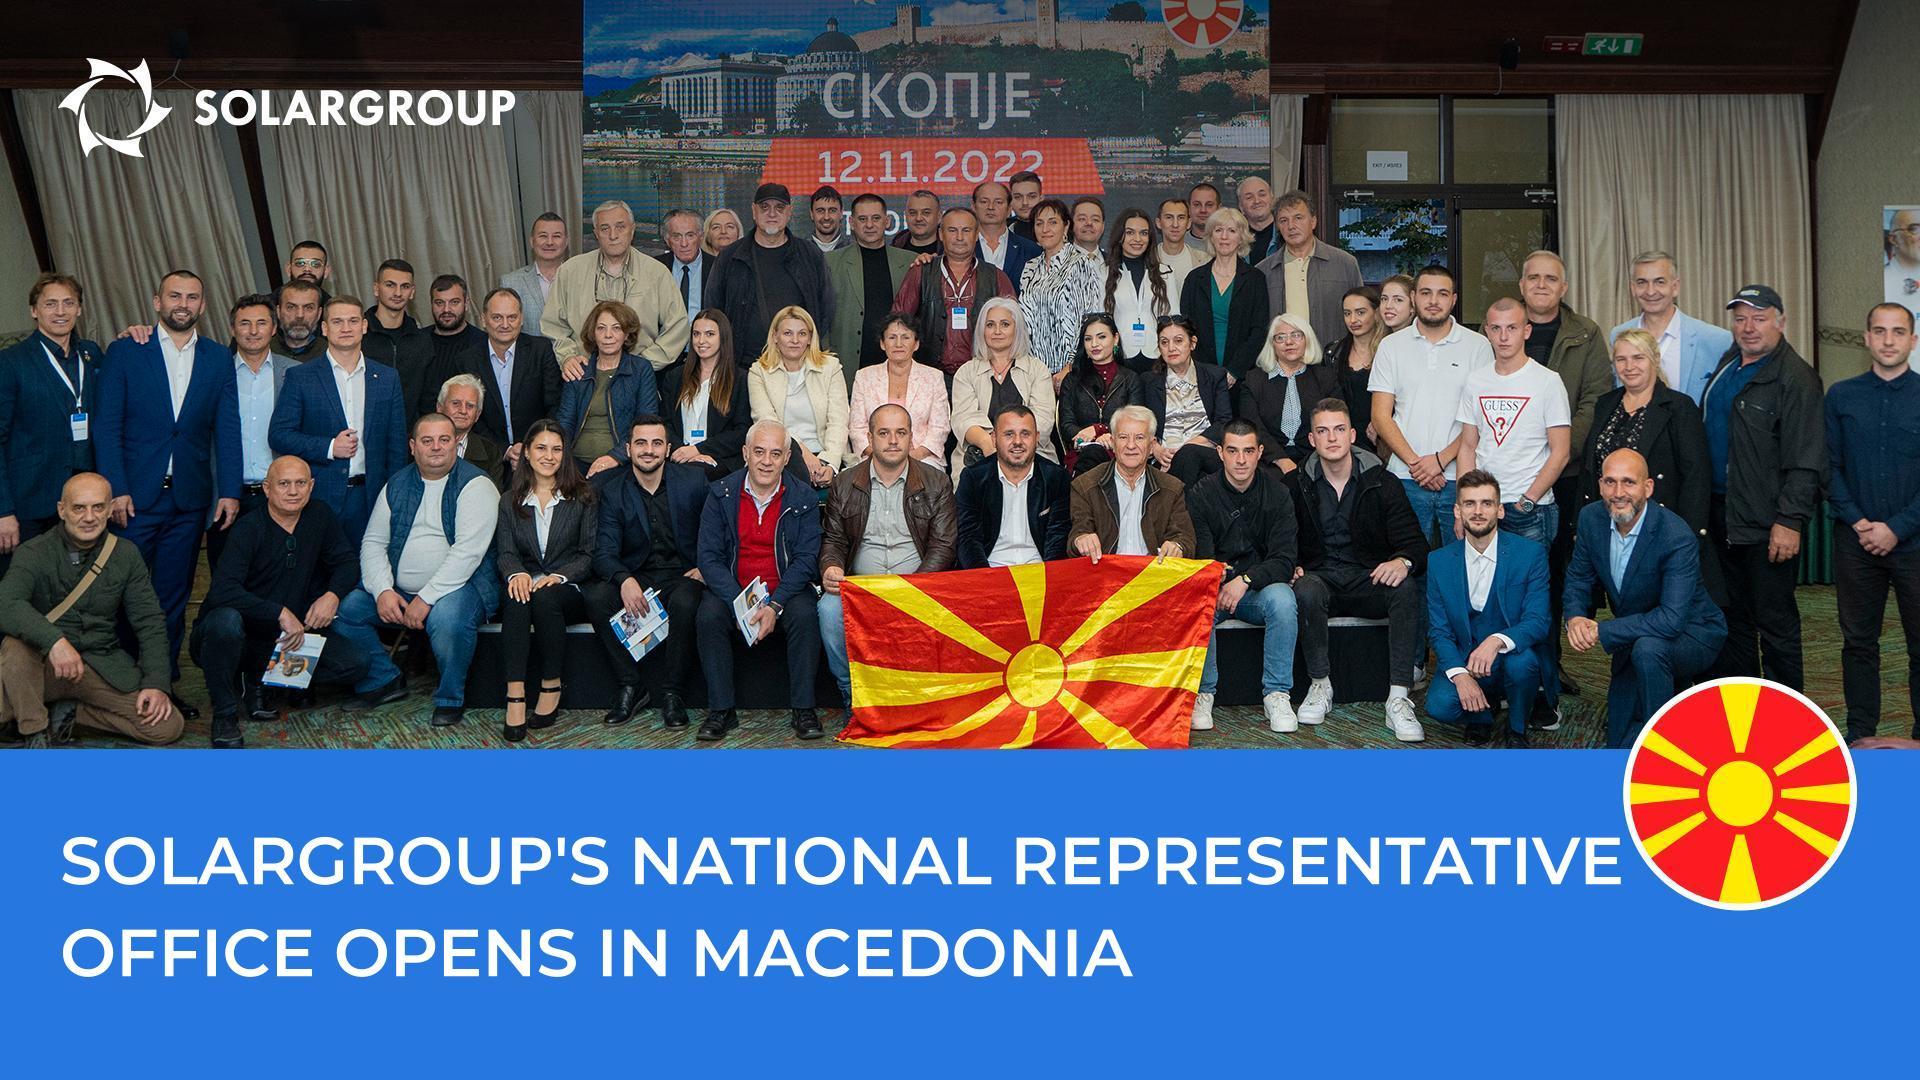 SOLARGROUP conference in North Macedonia: the highlights